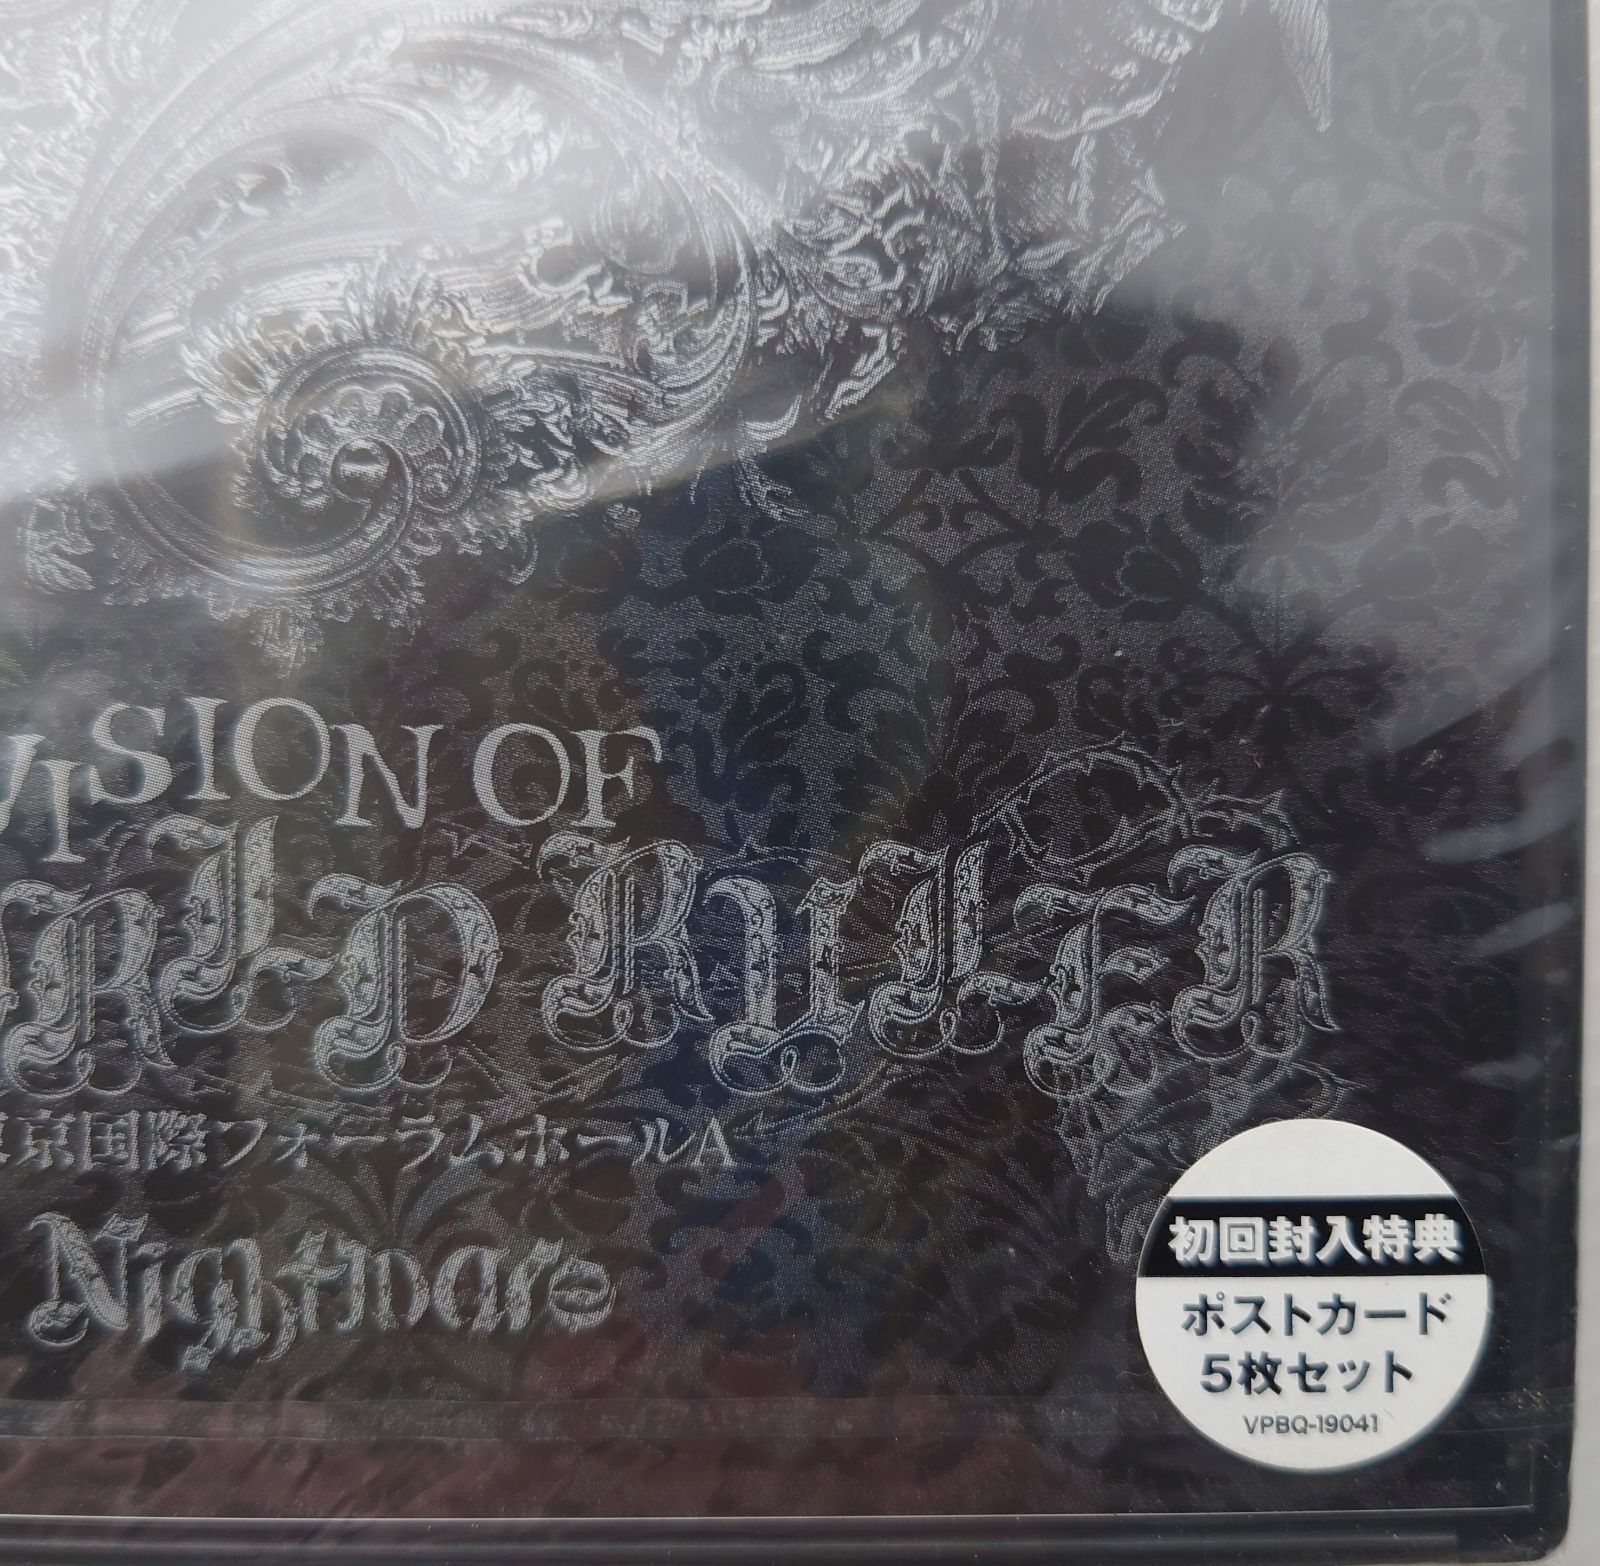 DVD】Nightmare/ナイトメア VISION OF the WORLD RULER at 東京国際 